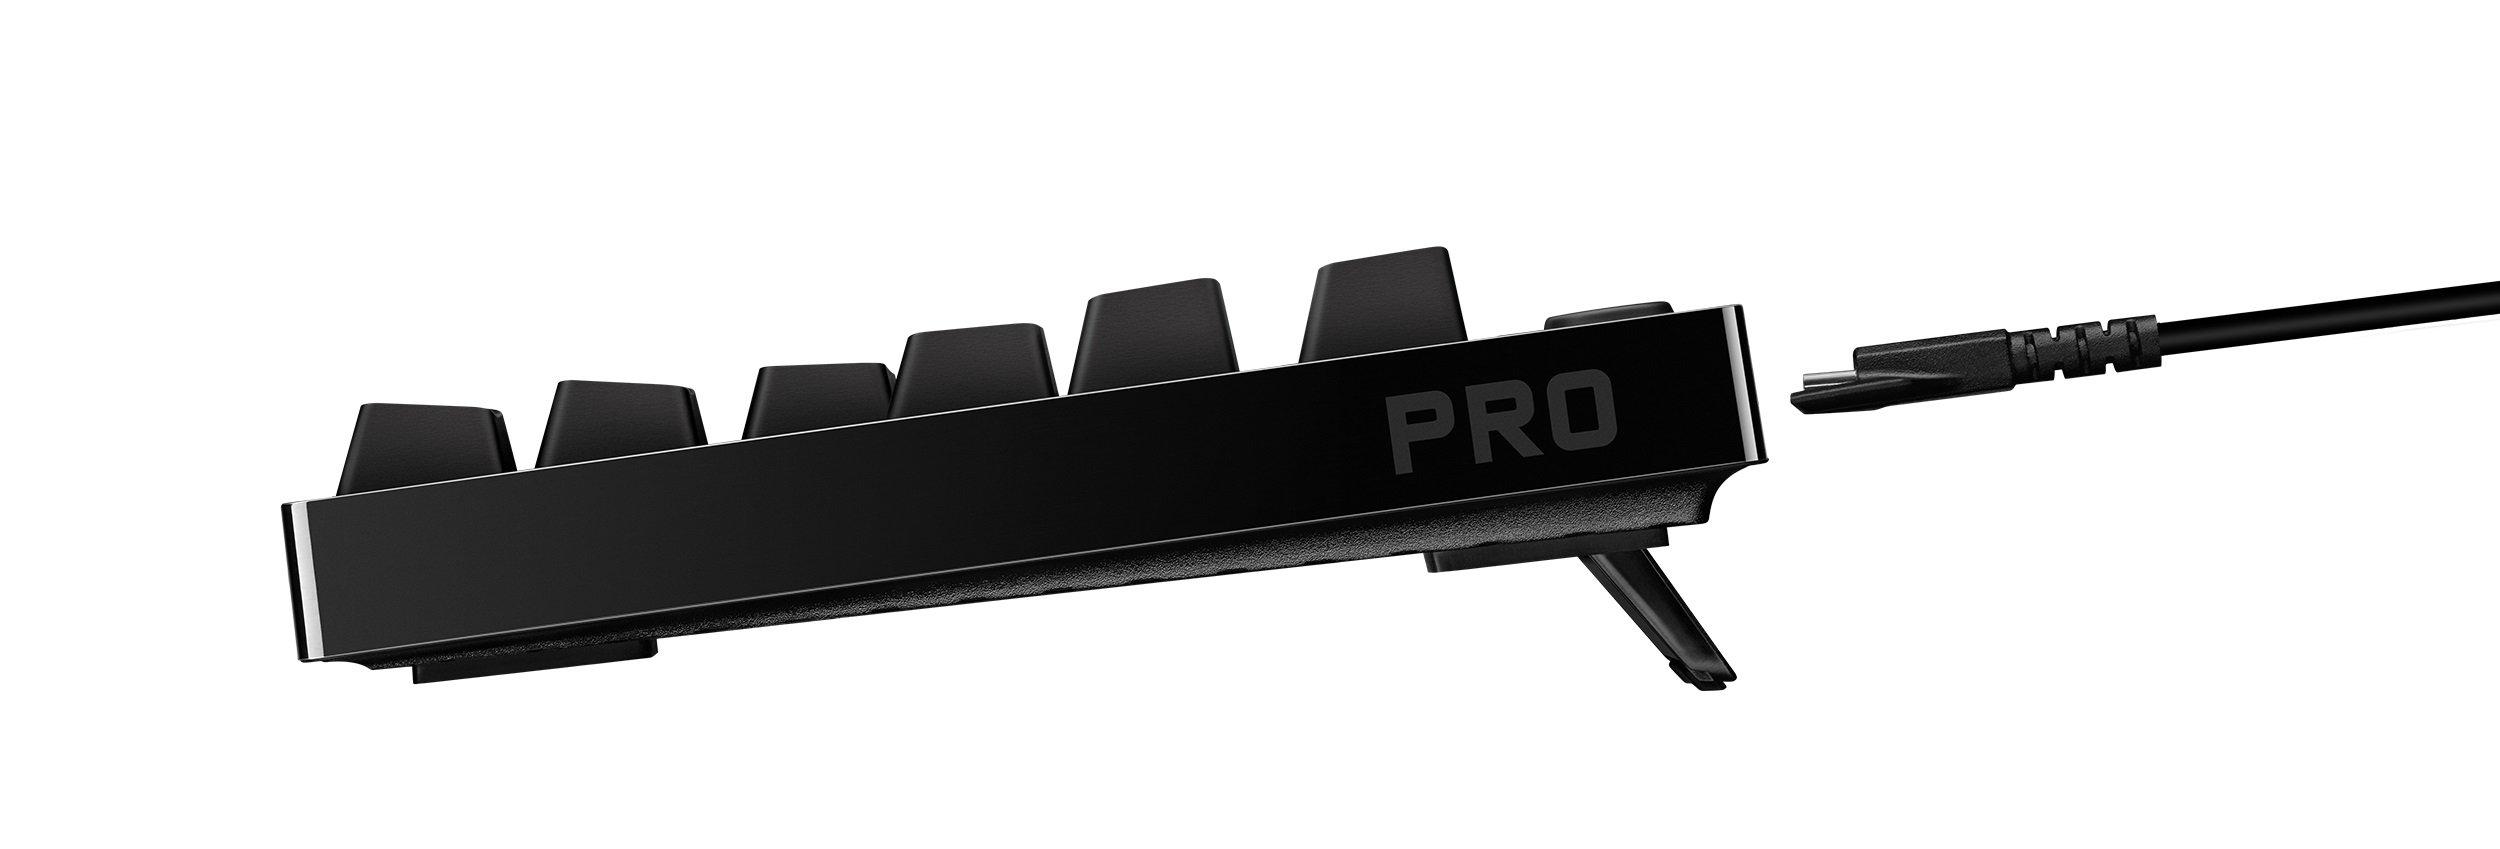 list item 3 of 4 Logitech G PRO Blue Clicky Wired Mechanical Gaming Keyboard